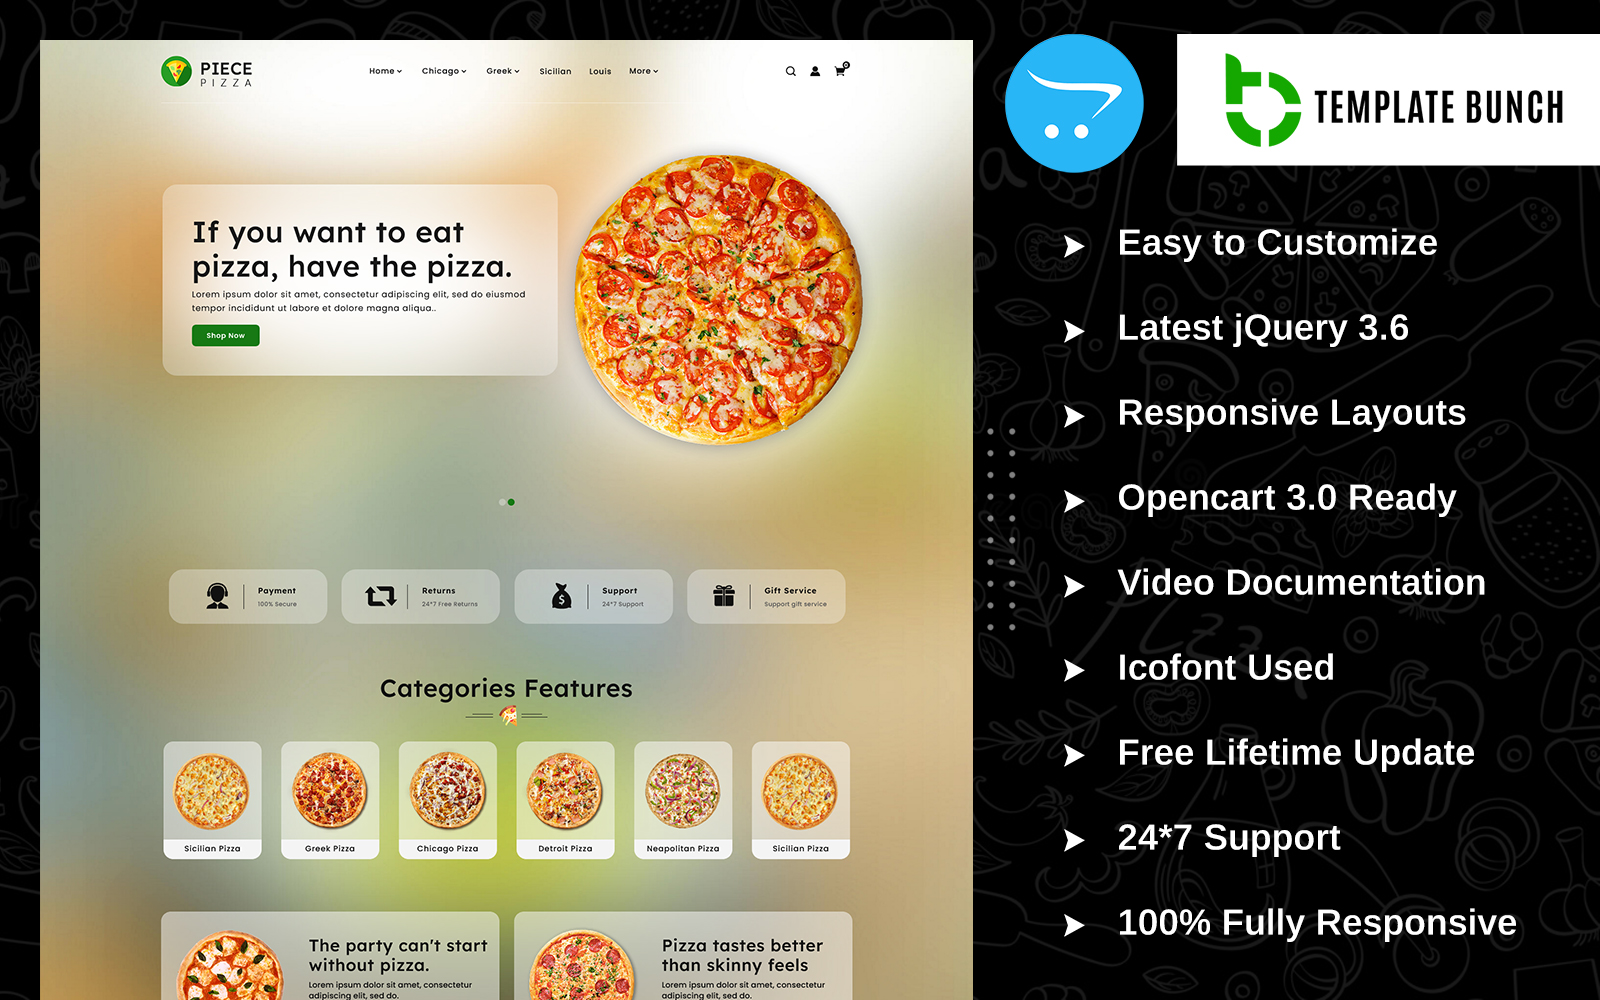 Piece Pizza - Responsive OpenCart Theme for eCommerce